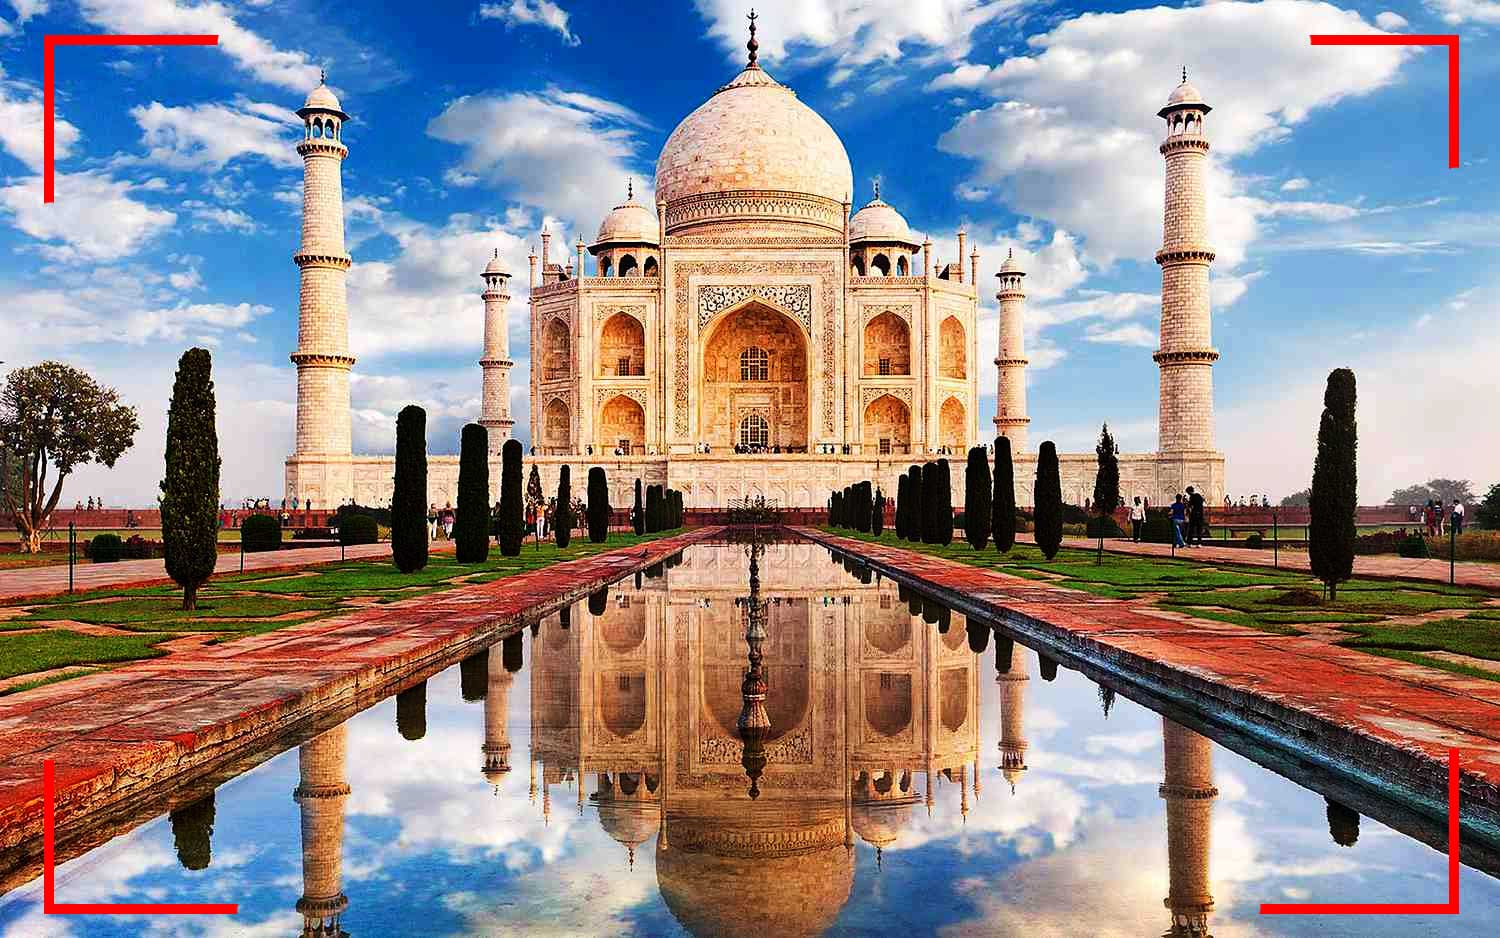 The Most Beautiful Tourist Attractions in India, Come Visit While There!